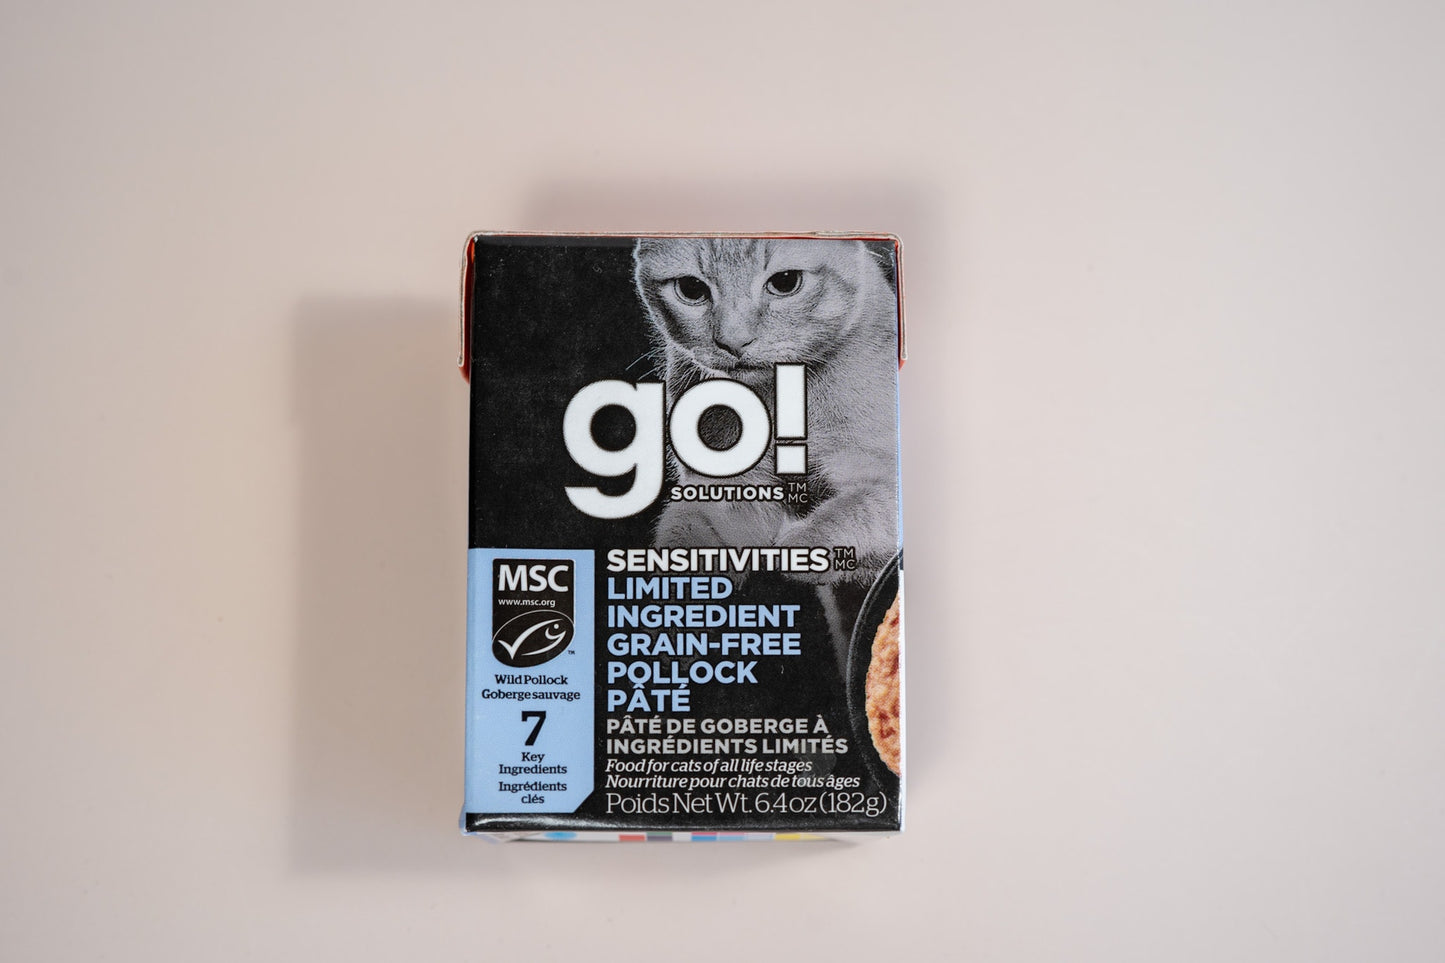 Food for cats with wild pollock and 7 key ingredients.